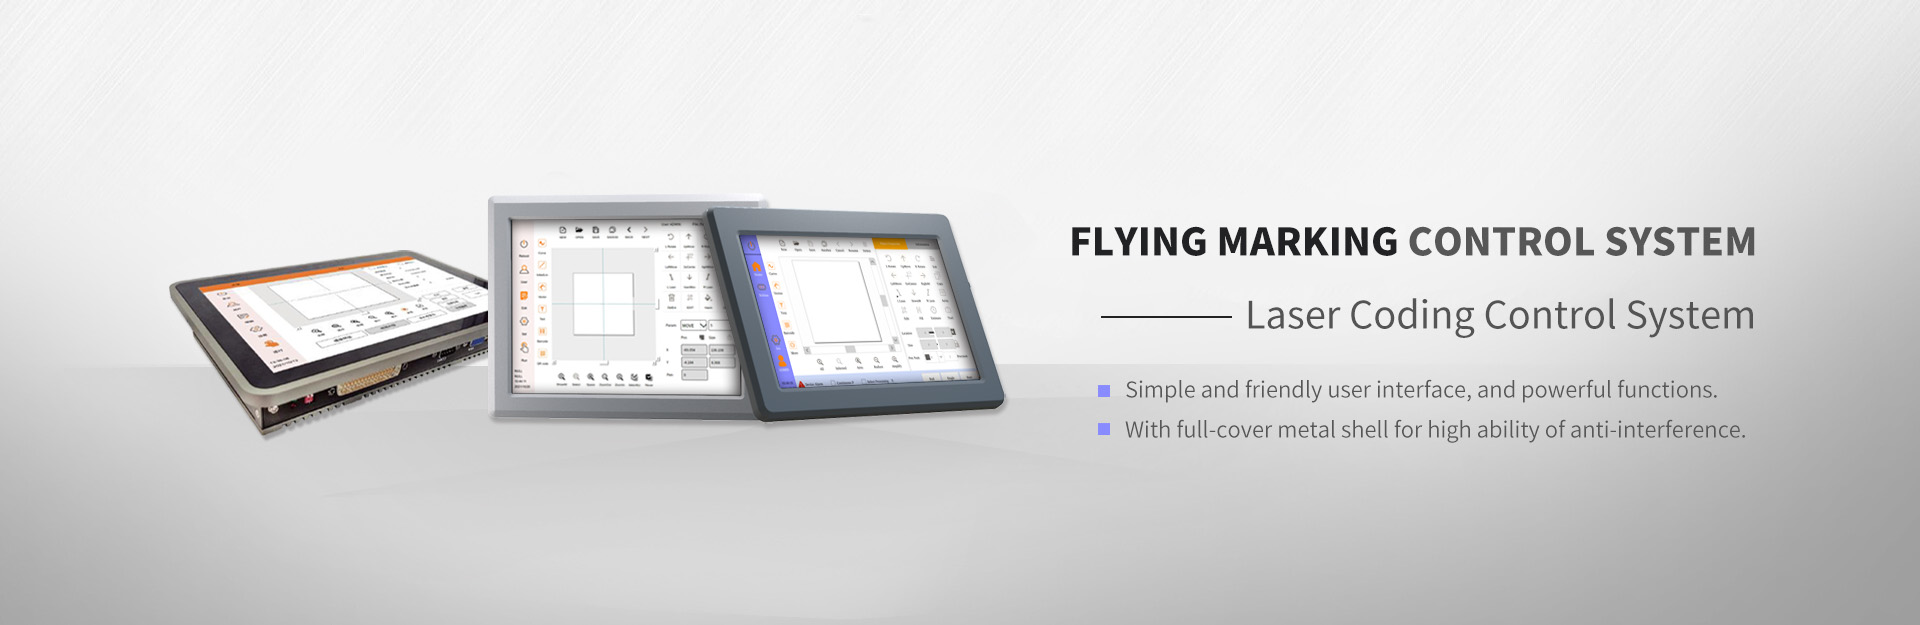 FLYING MARKING CONTROL SYSTEM